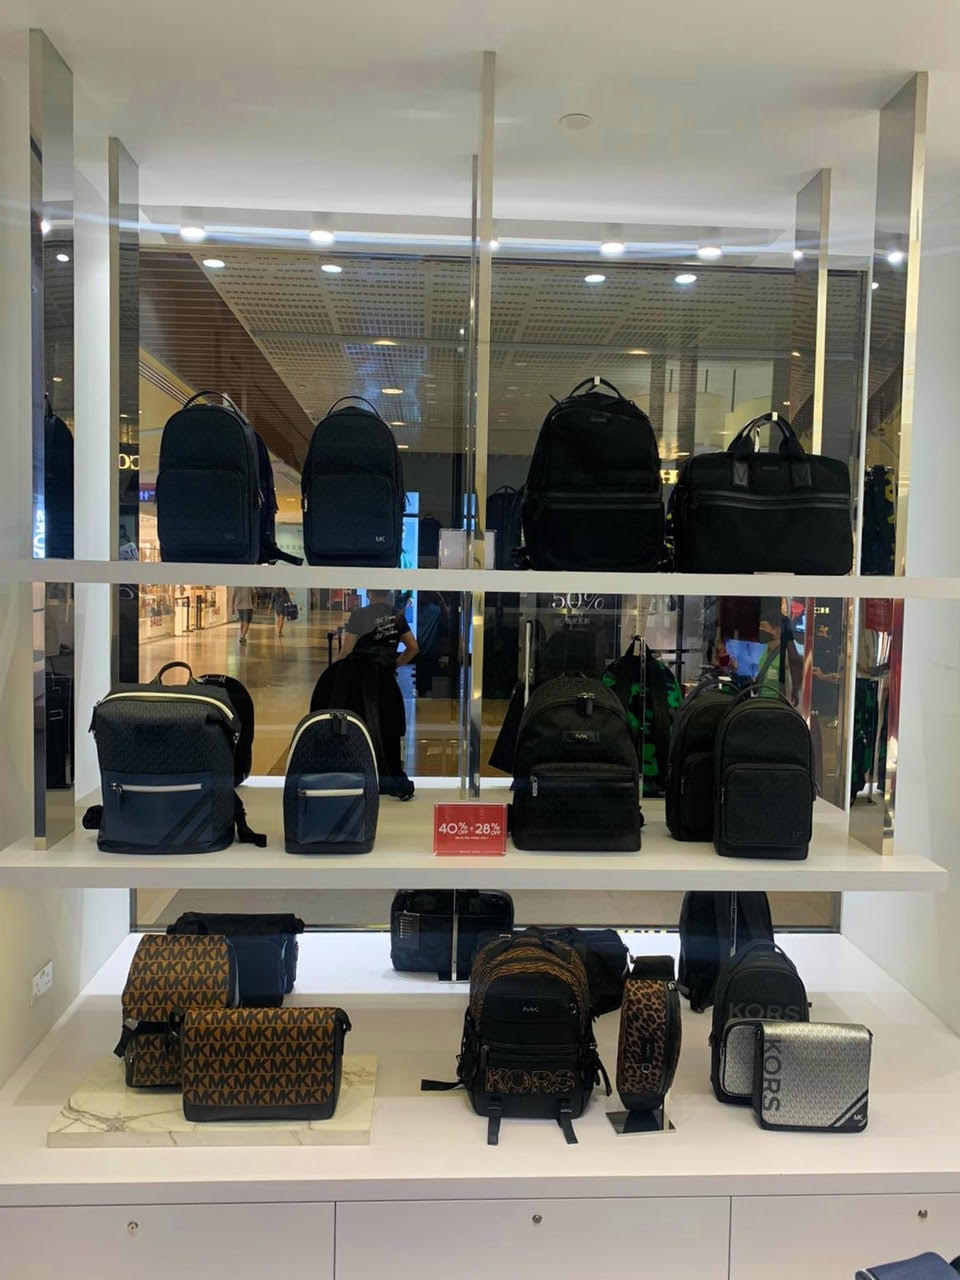 Up to 60%+20% off at Michael Kors IMM outlet sale now till July 5, 2020 ...